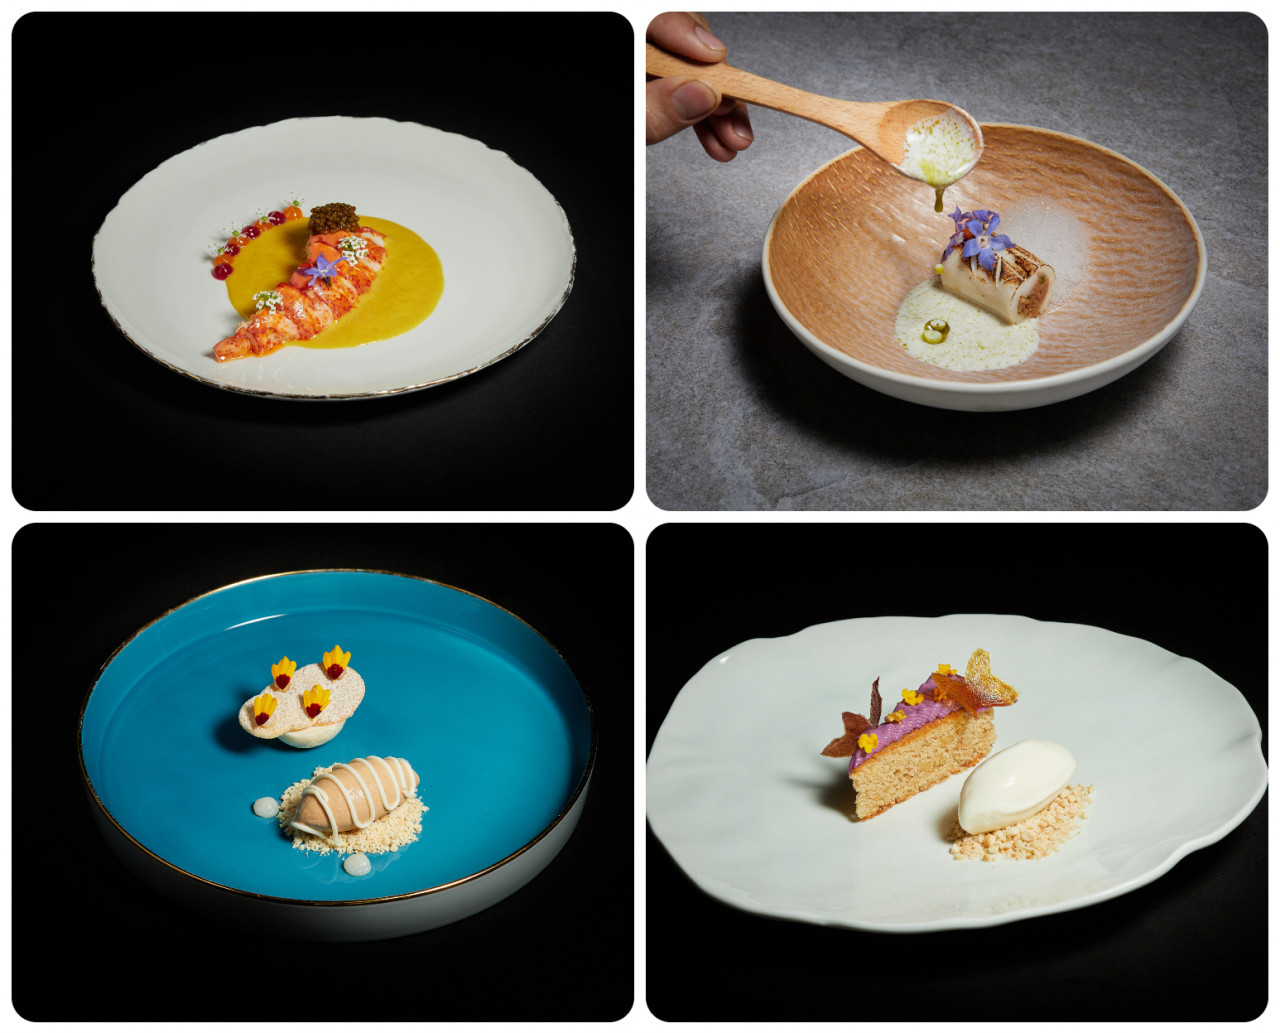 (Clockwise from Upper L) Lobster with Pineapple Pulissery, Squid Game, Rose Jam, and Murukku & Chai. More examples of the dishes that Nadodi has served. – Pic courtesy of Nadodi